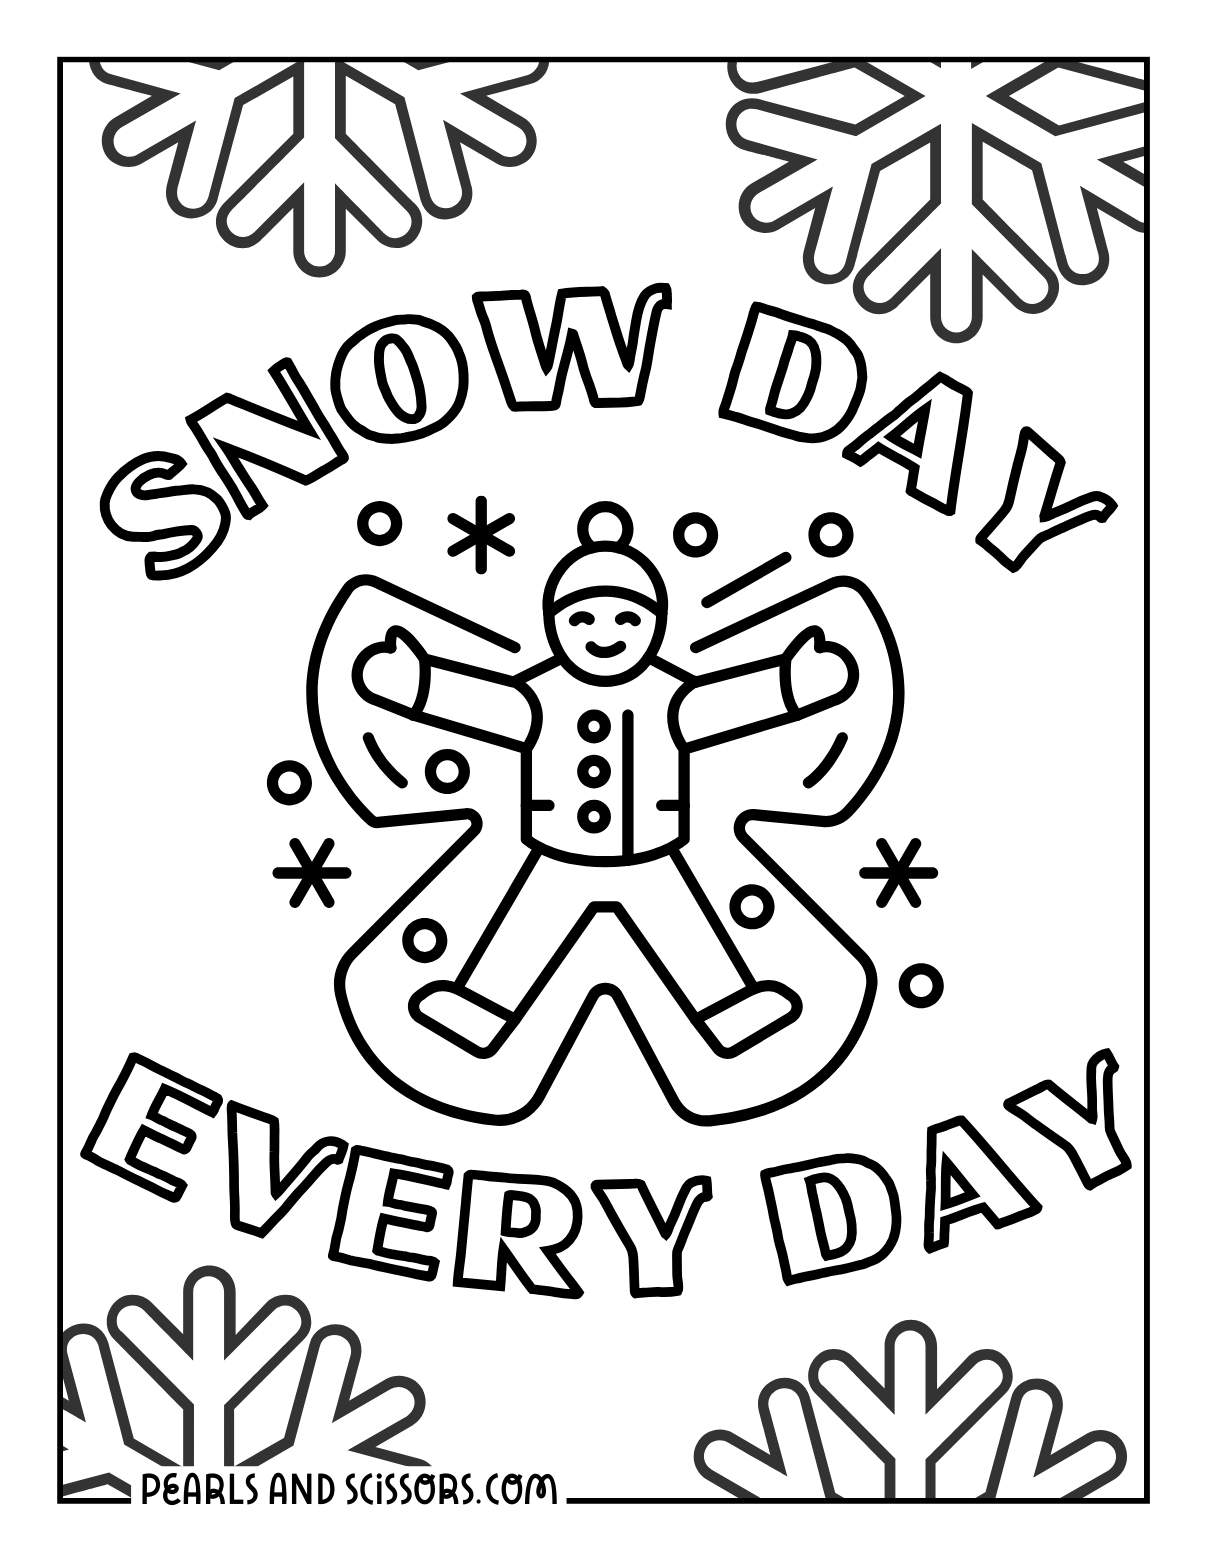 A cute snow angel snow day coloring page.